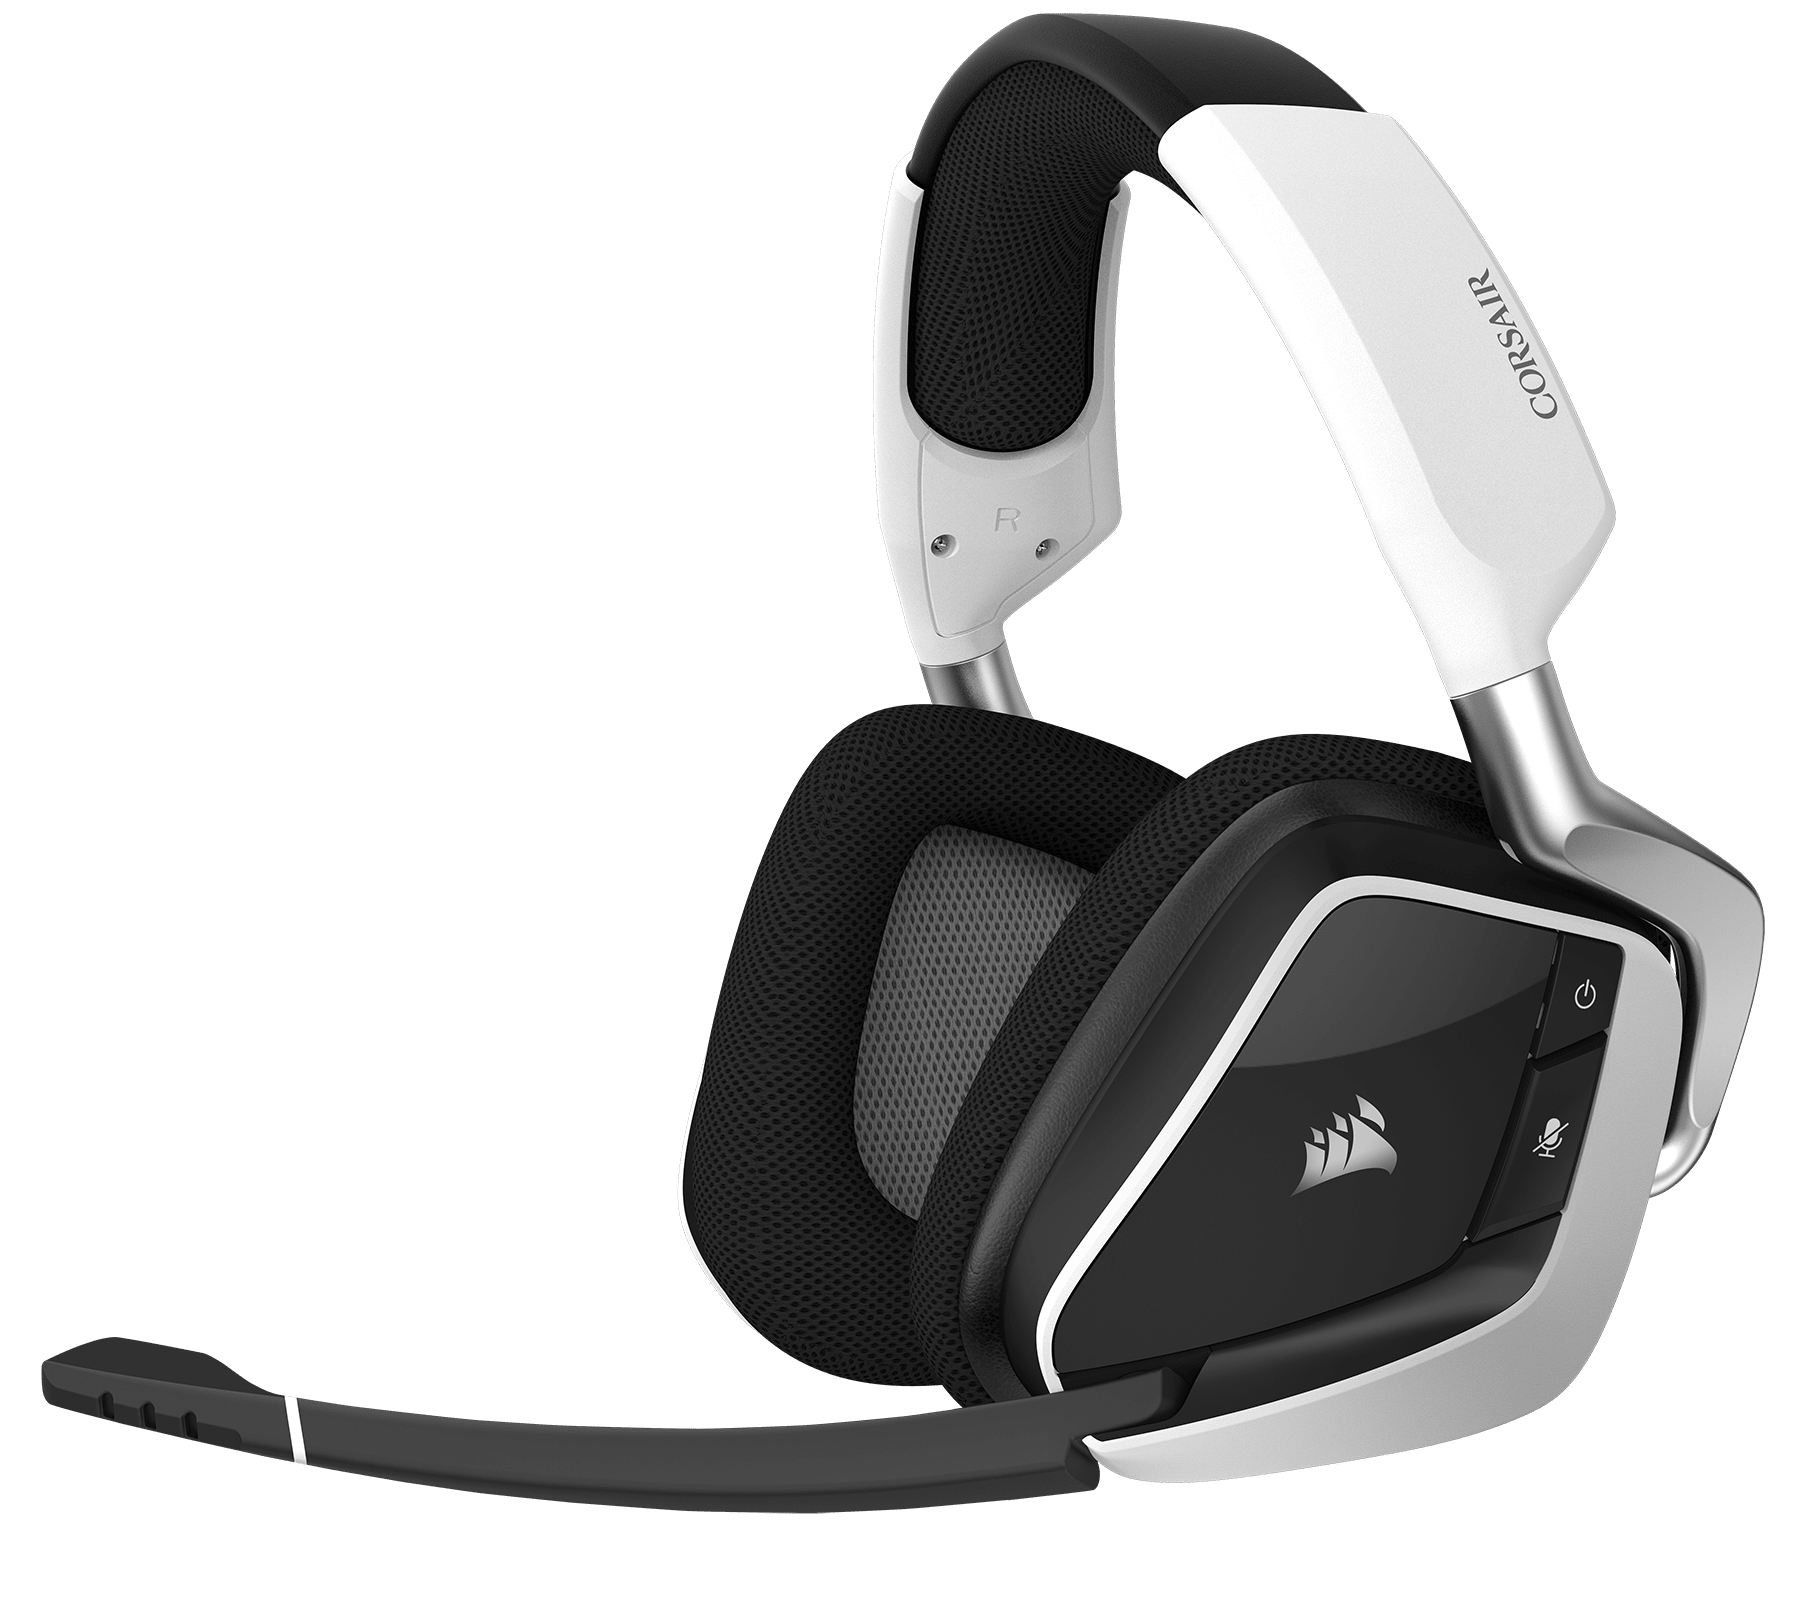 Vejrudsigt præst Hilse VOID PRO RGB Wireless Premium Gaming Headset with Dolby® Headphone 7.1 —  White (AP)